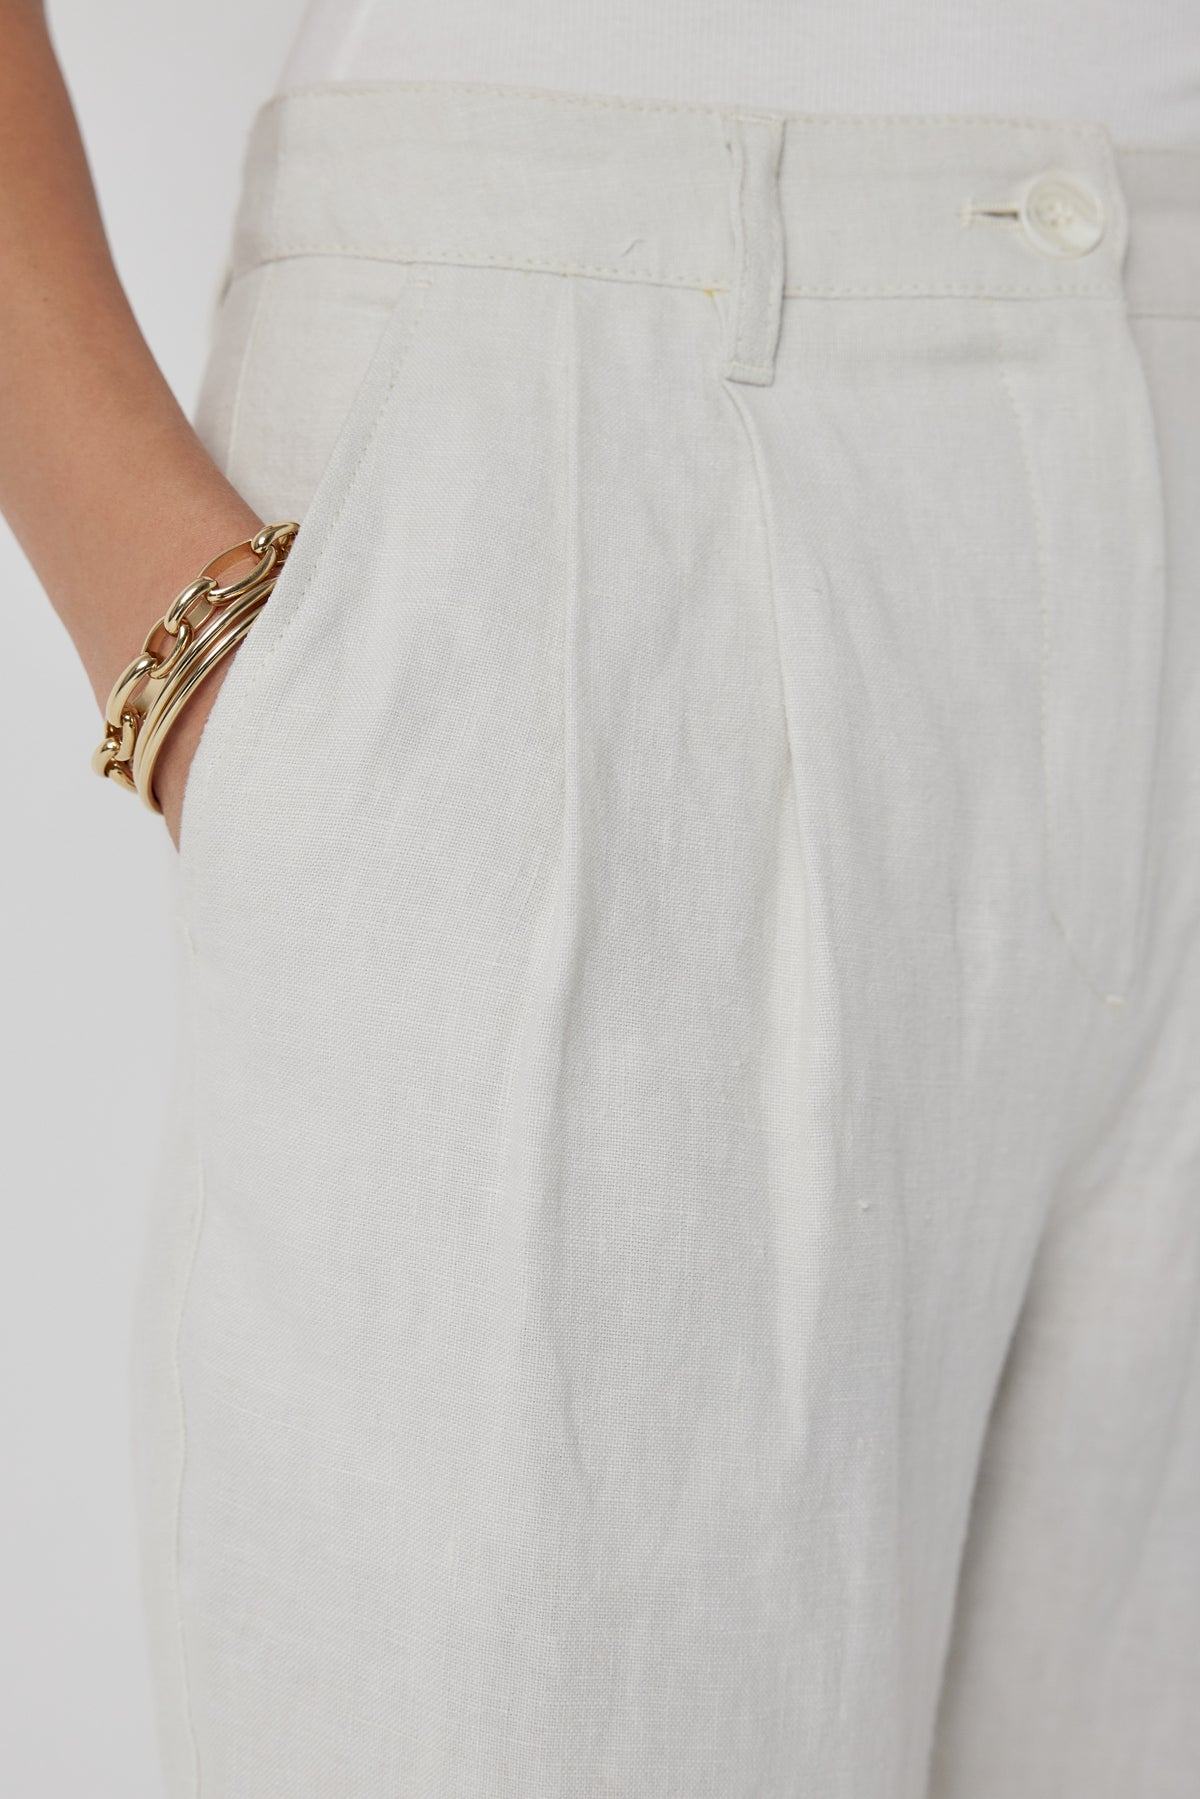 A close-up of a person wearing Velvet by Jenny Graham's POMONA PANT, white heavy-weight linen, straight-leg pants with their hand in the pocket, accessorized with gold bangle bracelets.-36168716746945